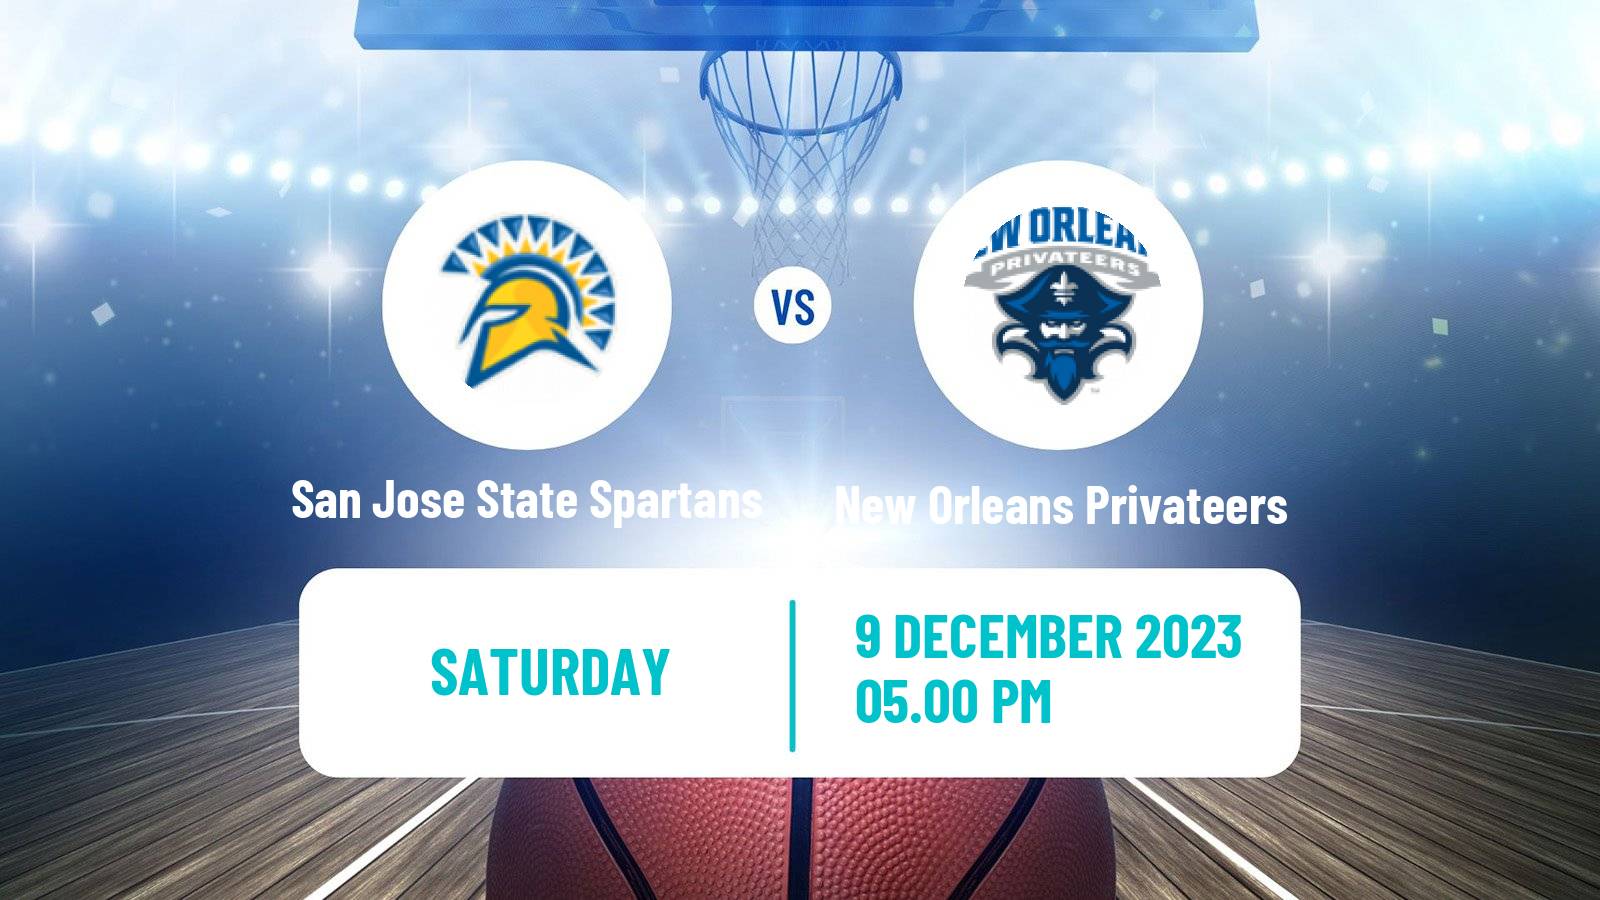 Basketball NCAA College Basketball San Jose State Spartans - New Orleans Privateers